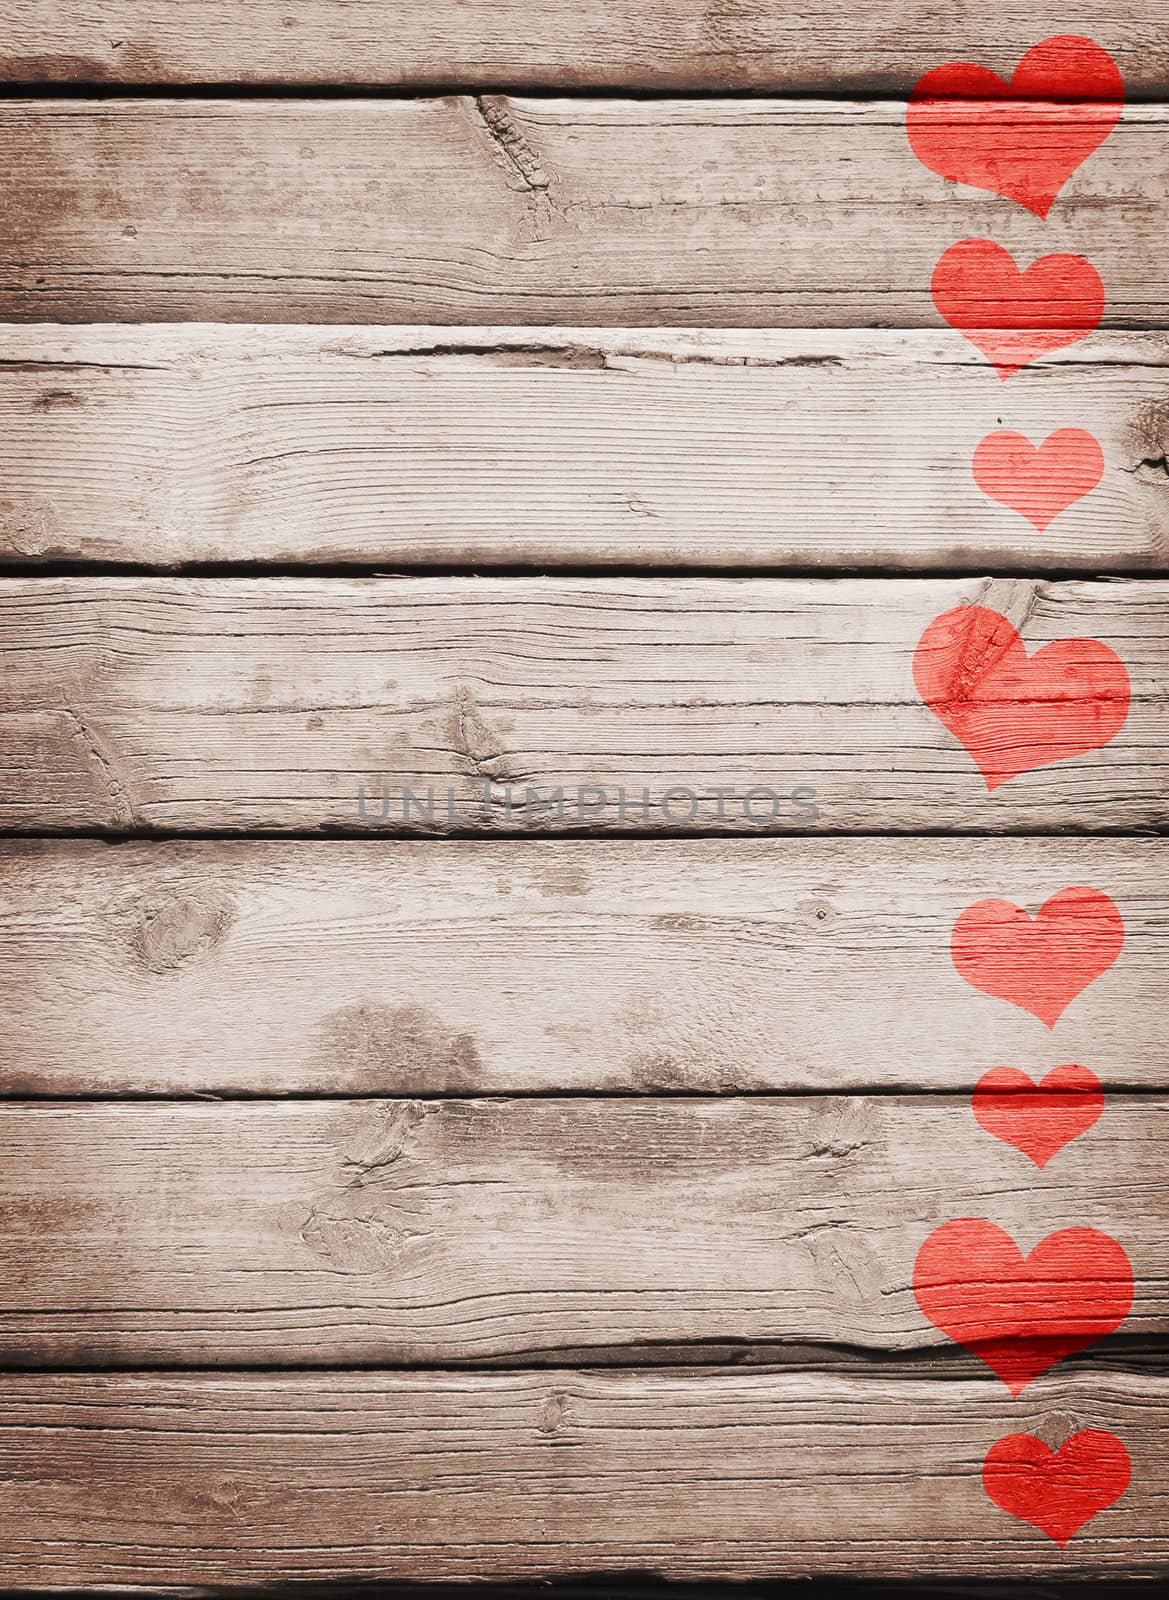 Red hearts painted on a wooden surface by cherezoff